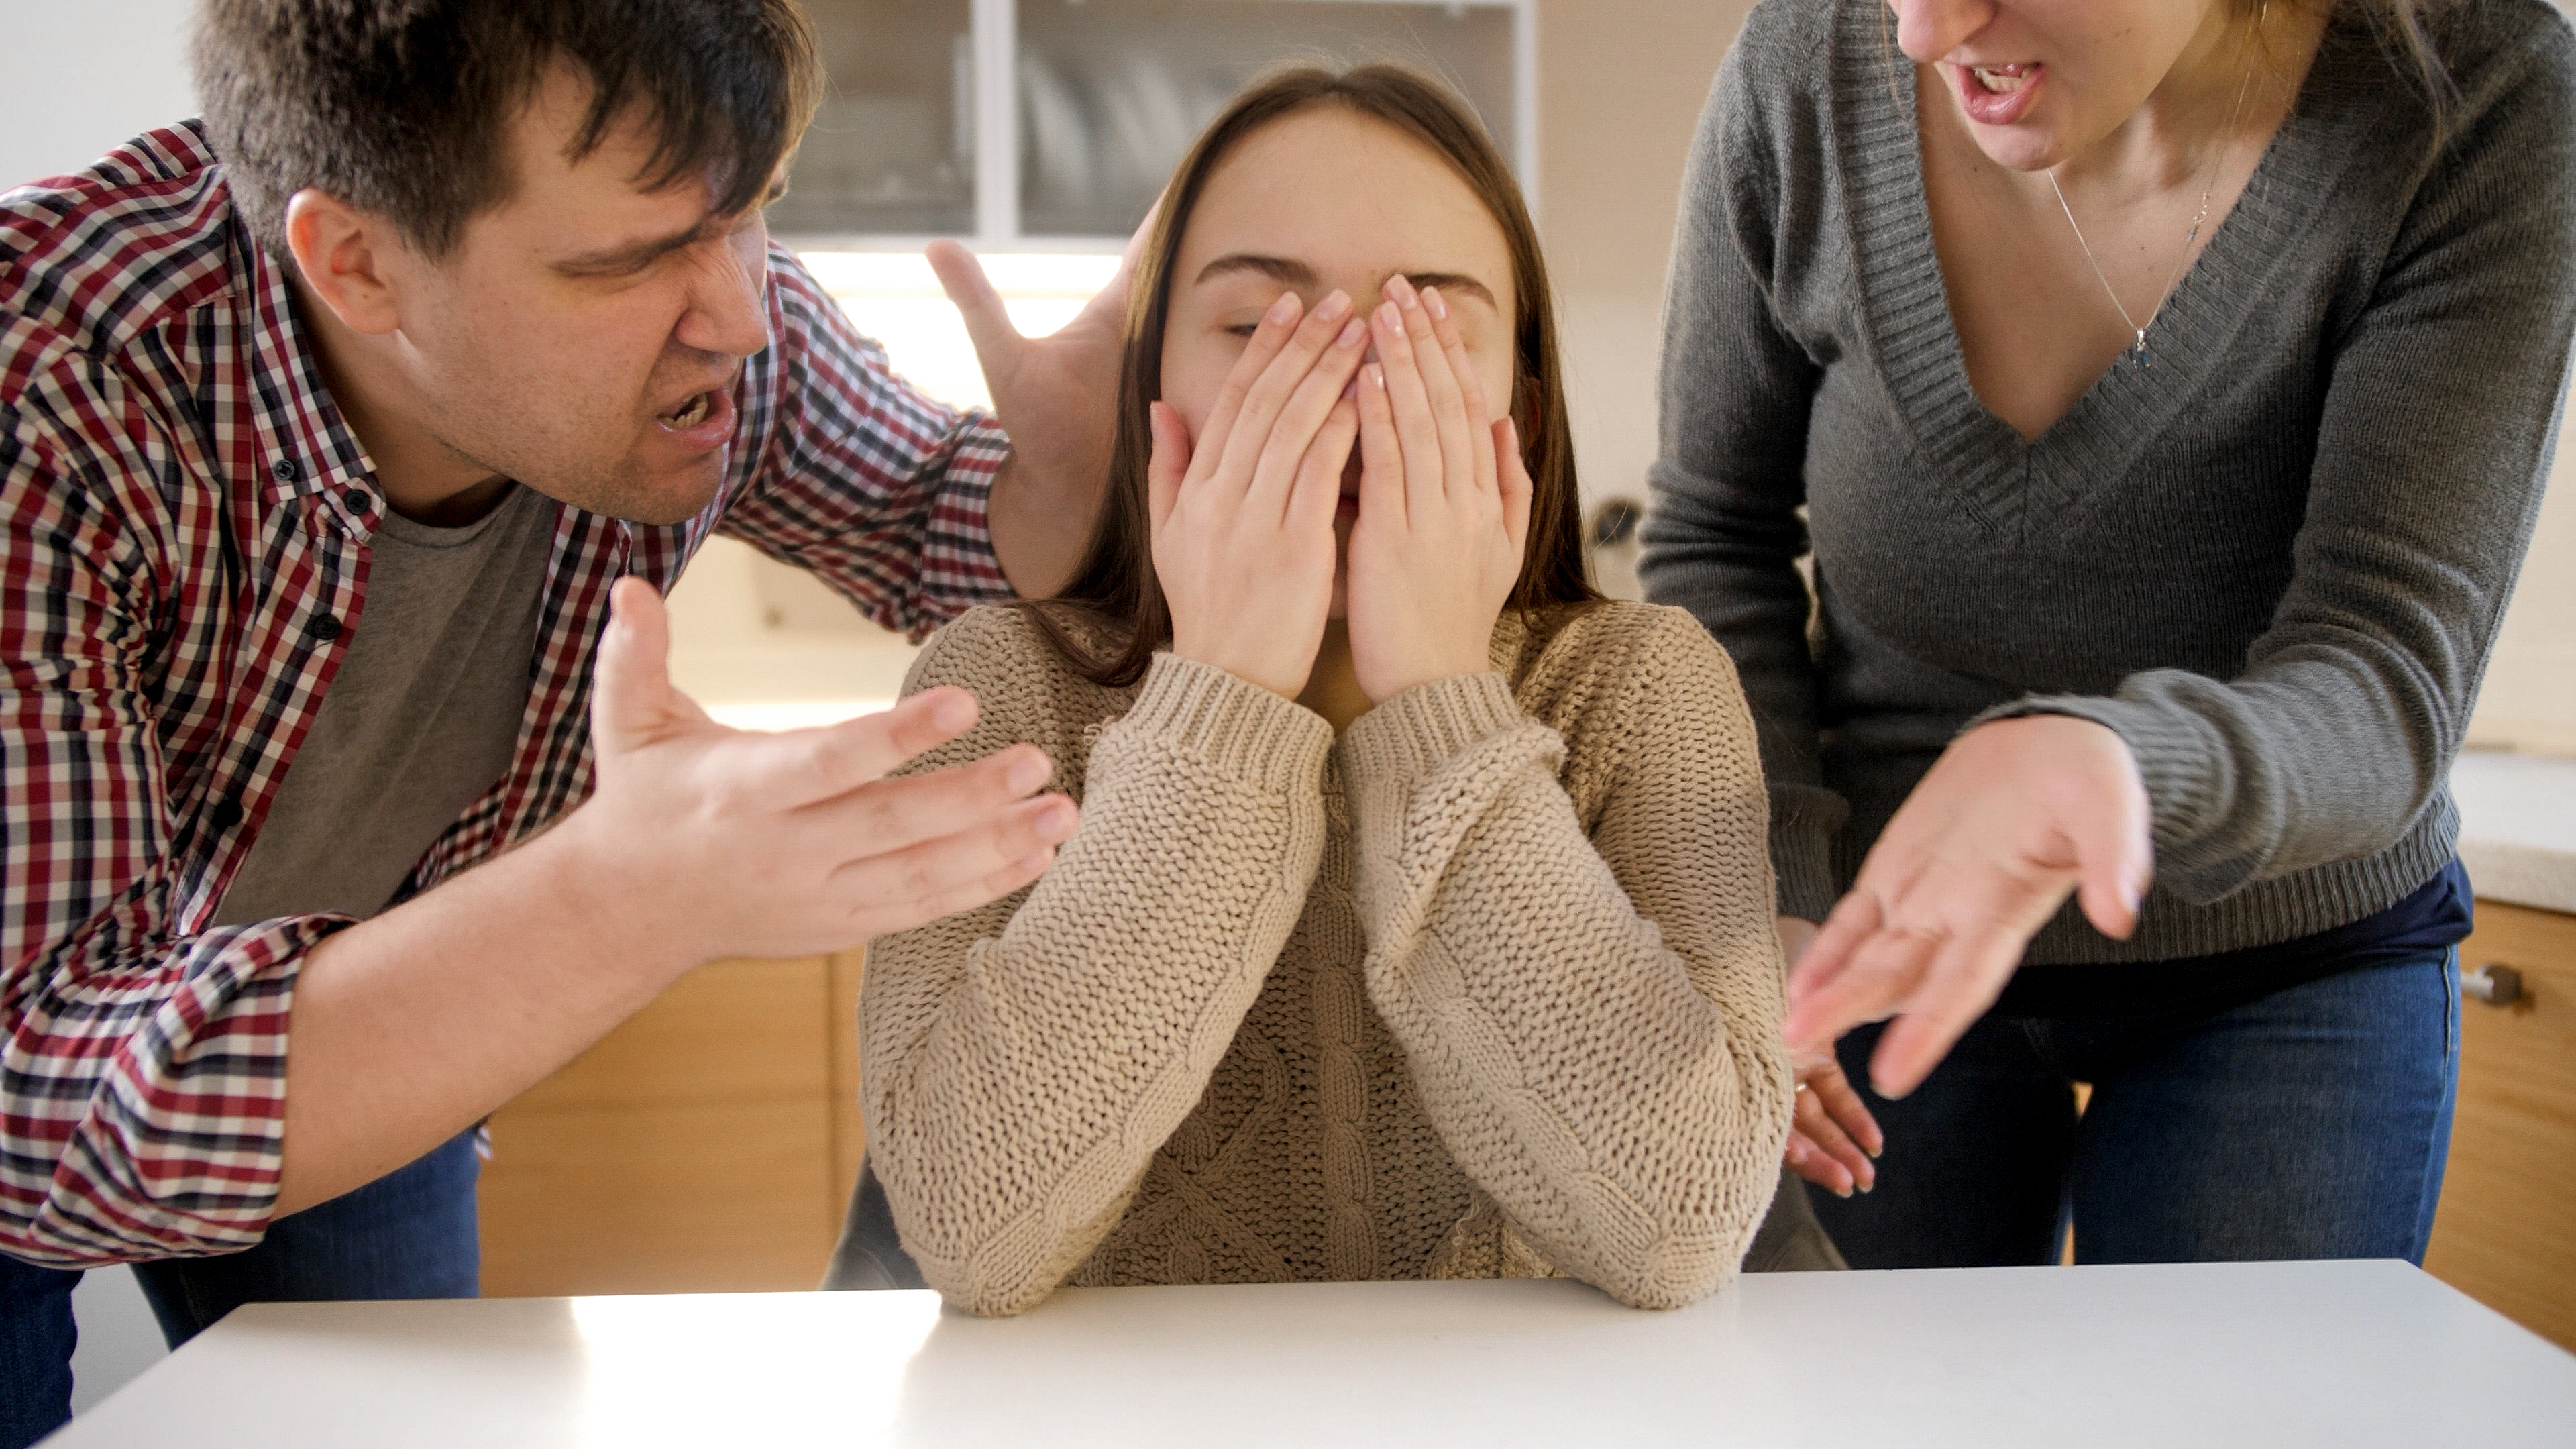 A woman's parents couldn't believe she broke up with her long-term boyfriend for another man. | Source: Shutterstock